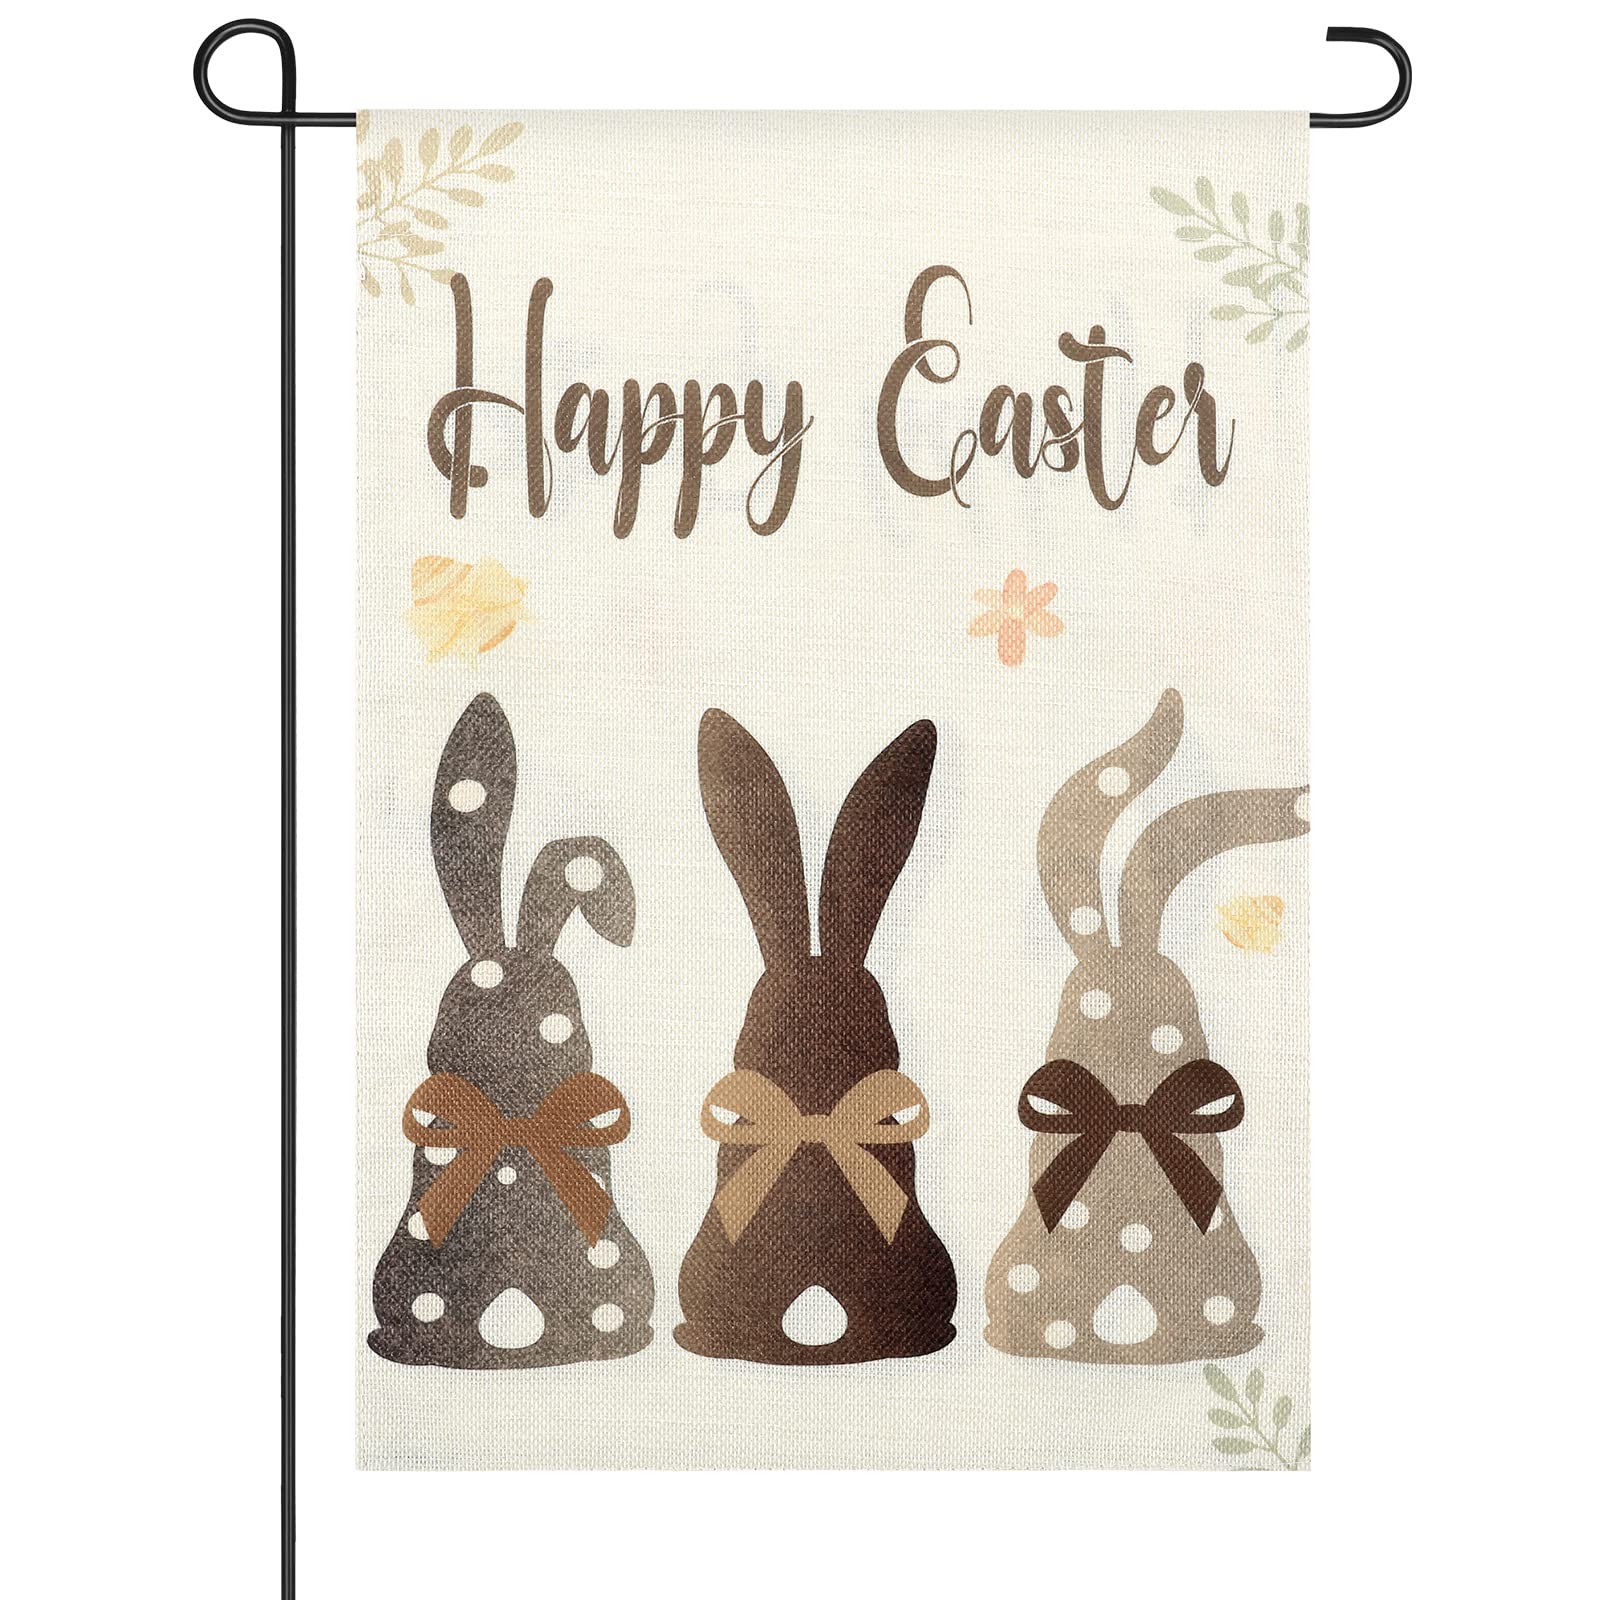 Happy Easter Bunnies Garden Flag 12 x 18 Inch Rabbit Garden Flag Double Sided Spring Garden Flag Burlap Small Polka Dots Brown Welcome Holiday Yard Flag for Easter Spring Holiday Outdoor Decor